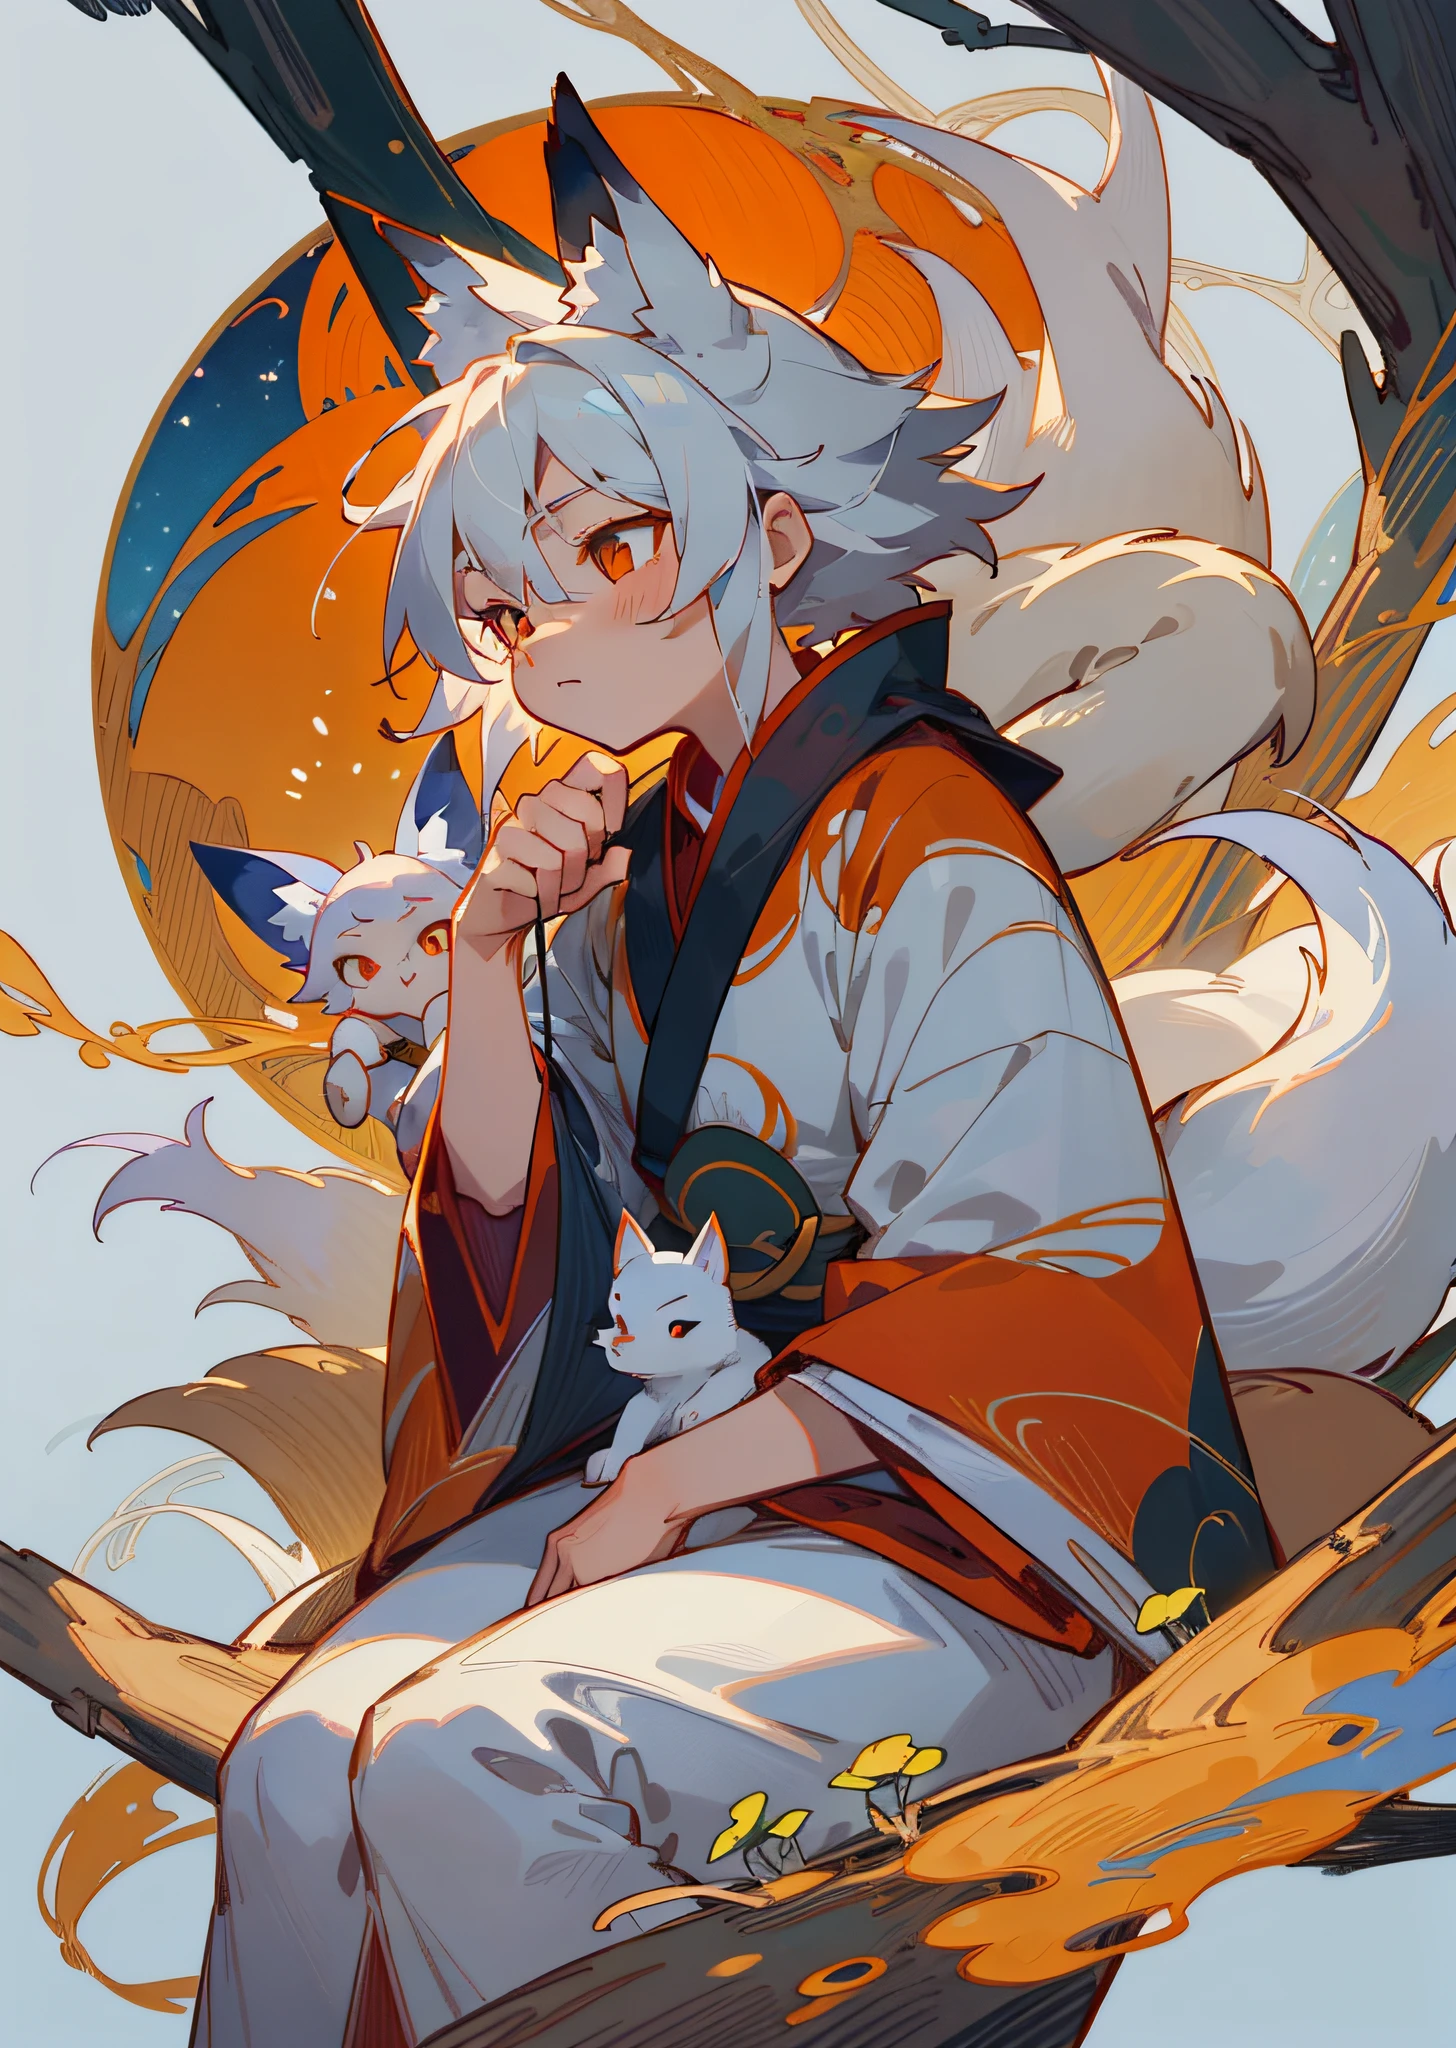 The background is a super large moon, a fox with white hair sitting on a branch under the stars, (Little Boy: 1.5), Red Clothes, Ethereal Fox, Nine-Tailed Fox, Dreamy, Millennium Fox Demon, Onmyoji Detailed Art, Nine Tails, Beautiful Artwork Illustrations, Mythical Creatures, Foxes, Beautiful Digital Works of Art,